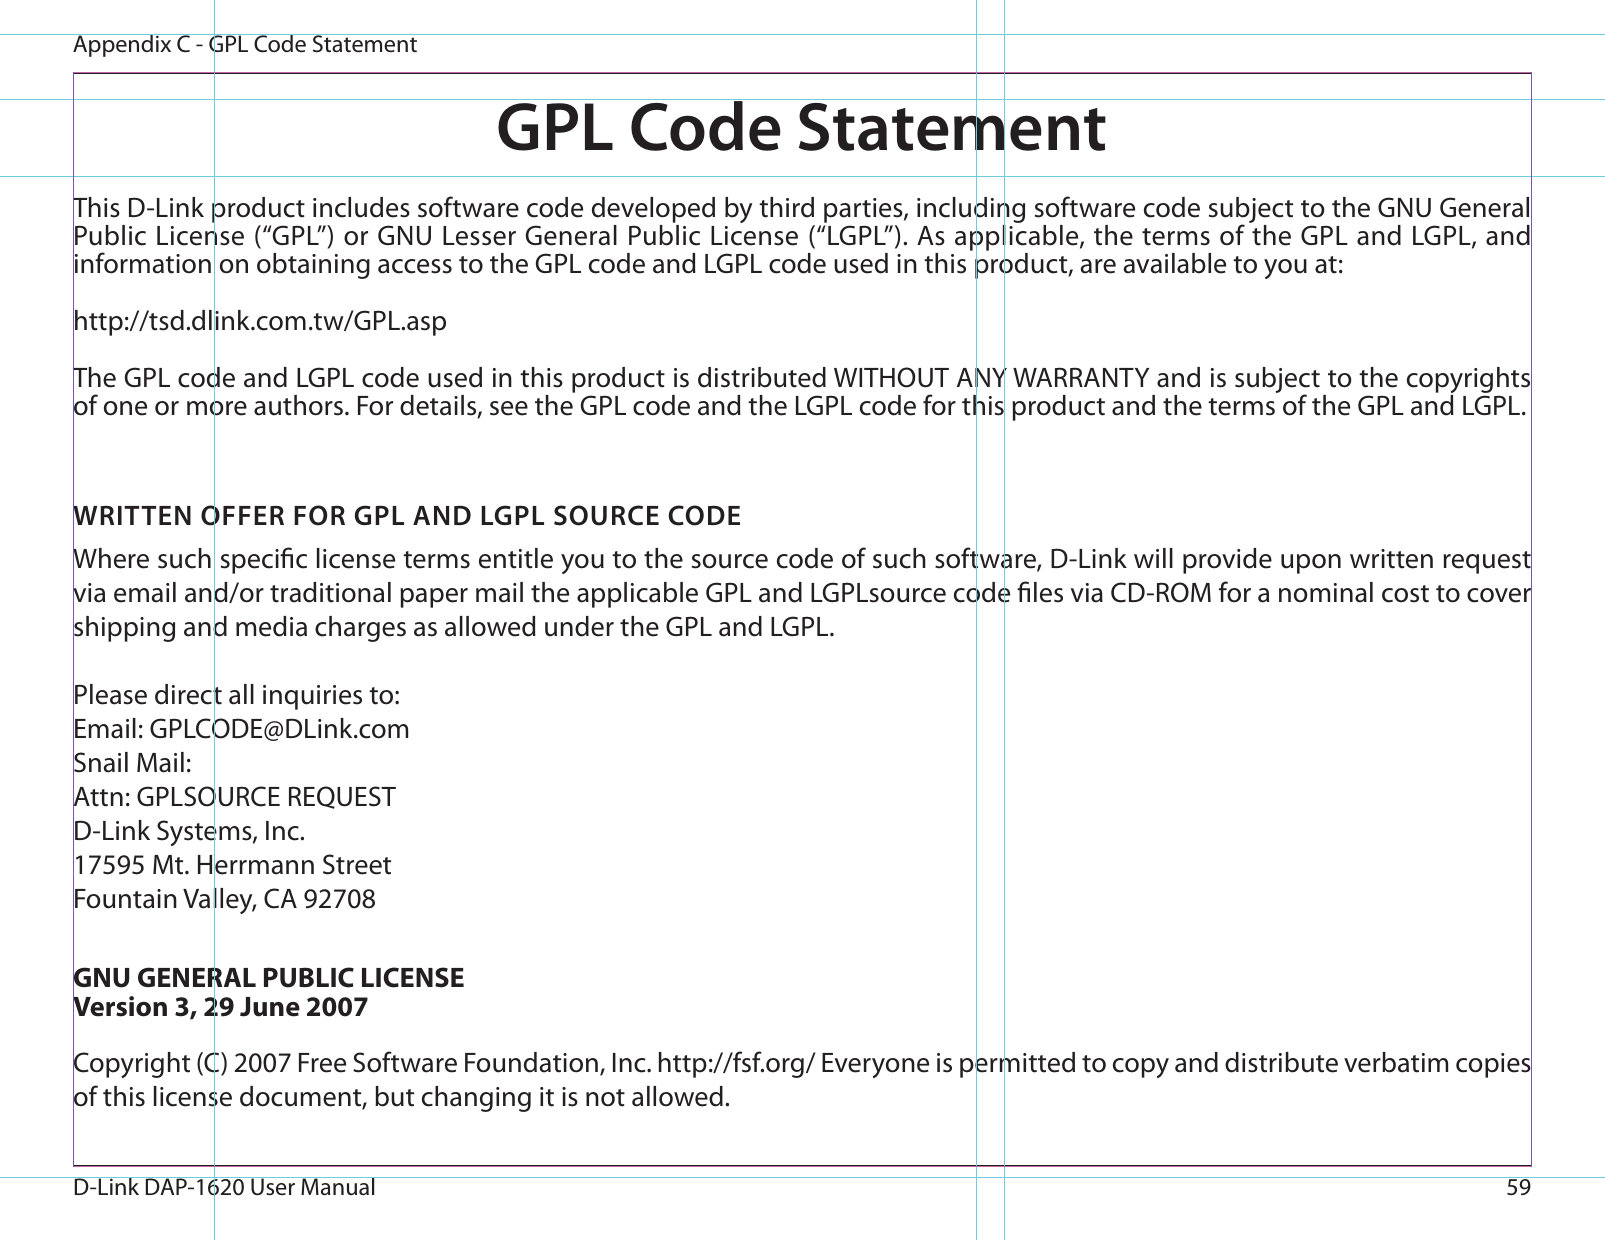 59D-Link DAP-1620 User ManualAppendix C - GPL Code StatementGPL Code StatementThis D-Link product includes software code developed by third parties, including software code subject to the GNU General Public License (“GPL”) or GNU Lesser General Public License (“LGPL”). As applicable, the terms of the GPL and LGPL, and information on obtaining access to the GPL code and LGPL code used in this product, are available to you at:http://tsd.dlink.com.tw/GPL.aspThe GPL code and LGPL code used in this product is distributed WITHOUT ANY WARRANTY and is subject to the copyrights of one or more authors. For details, see the GPL code and the LGPL code for this product and the terms of the GPL and LGPL.WRITTEN OFFER FOR GPL AND LGPL SOURCE CODEWhere such specic license terms entitle you to the source code of such software, D-Link will provide upon written request via email and/or traditional paper mail the applicable GPL and LGPLsource code les via CD-ROM for a nominal cost to cover shipping and media charges as allowed under the GPL and LGPL. Please direct all inquiries to:Email: GPLCODE@DLink.comSnail Mail:Attn: GPLSOURCE REQUESTD-Link Systems, Inc.17595 Mt. Herrmann StreetFountain Valley, CA 92708GNU GENERAL PUBLIC LICENSEVersion 3, 29 June 2007Copyright (C) 2007 Free Software Foundation, Inc. http://fsf.org/ Everyone is permitted to copy and distribute verbatim copies of this license document, but changing it is not allowed.